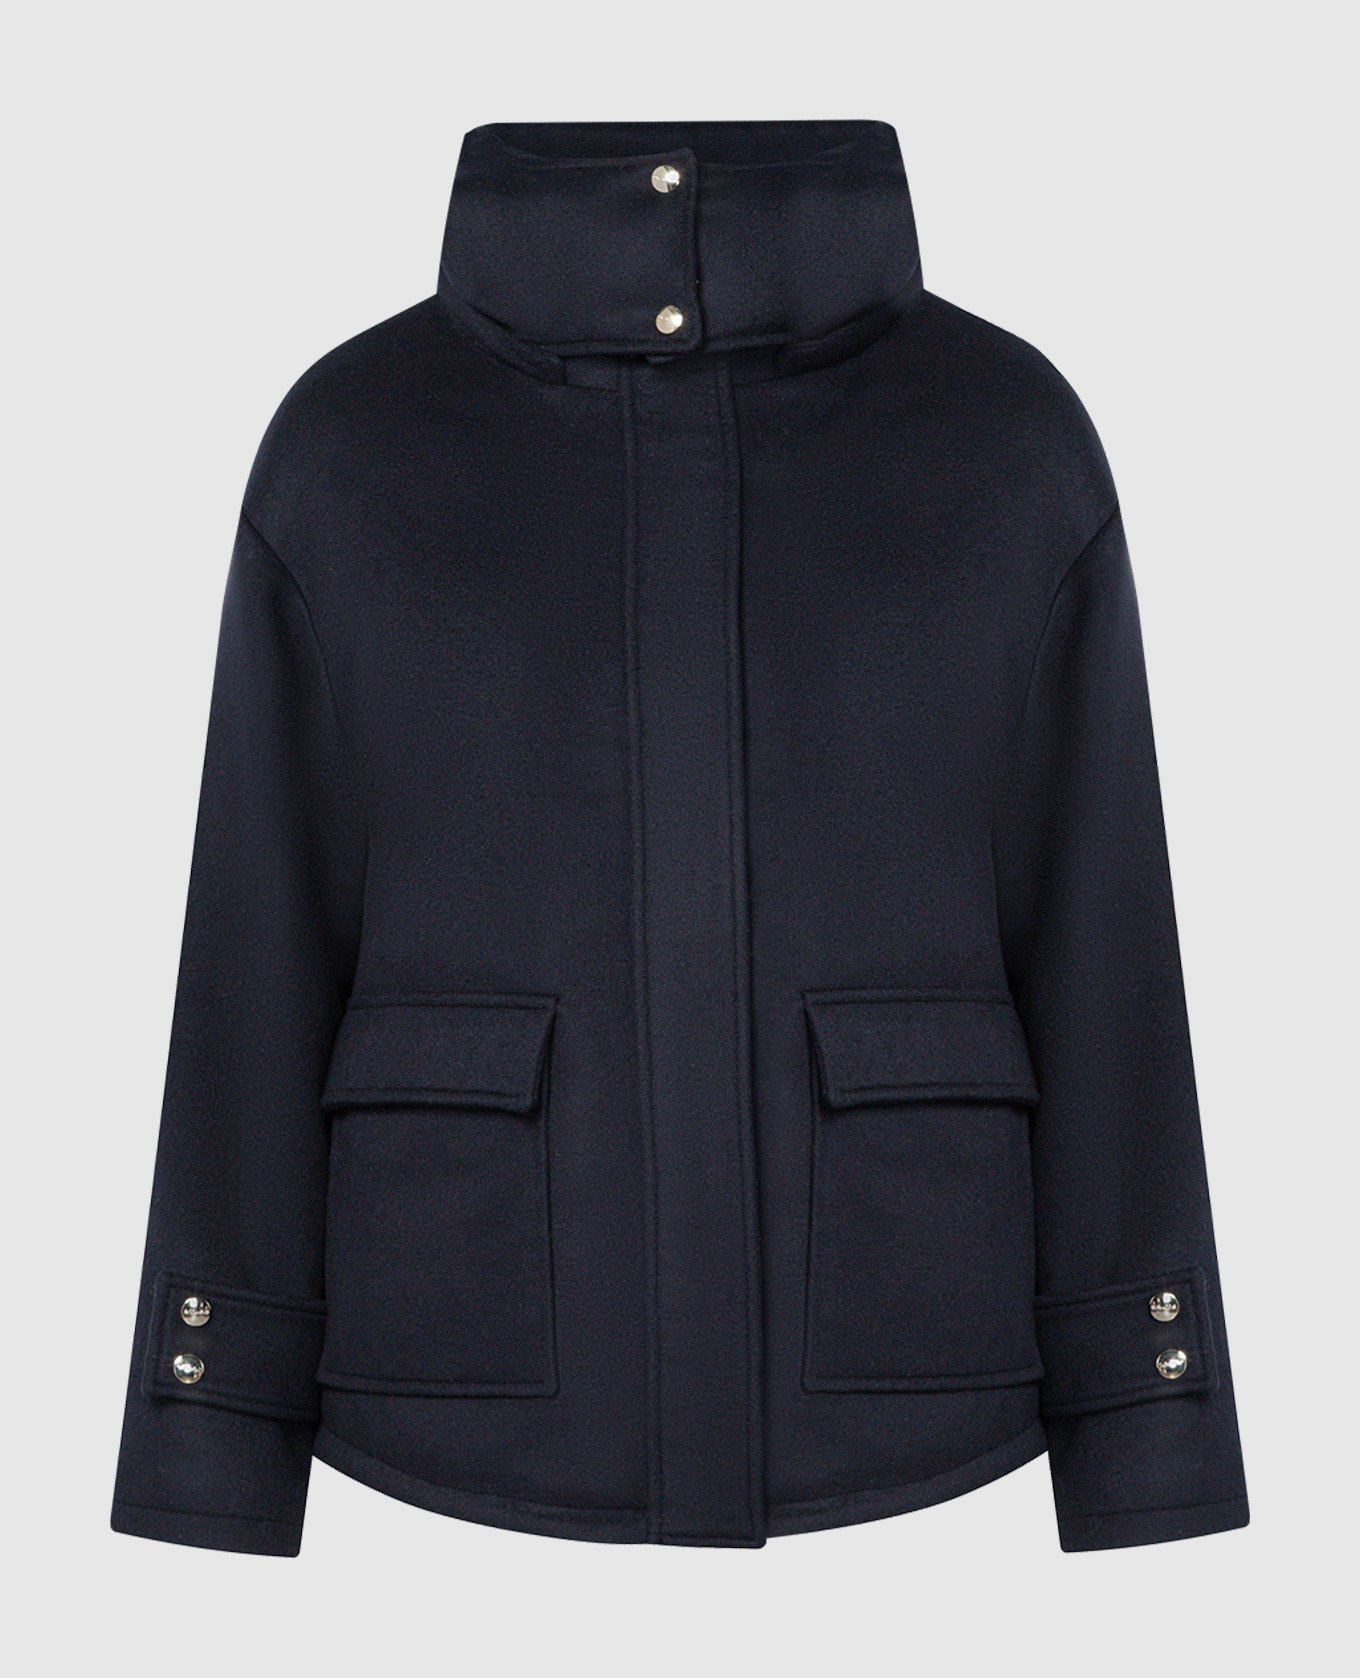 Blue down jacket made of wool and cashmere